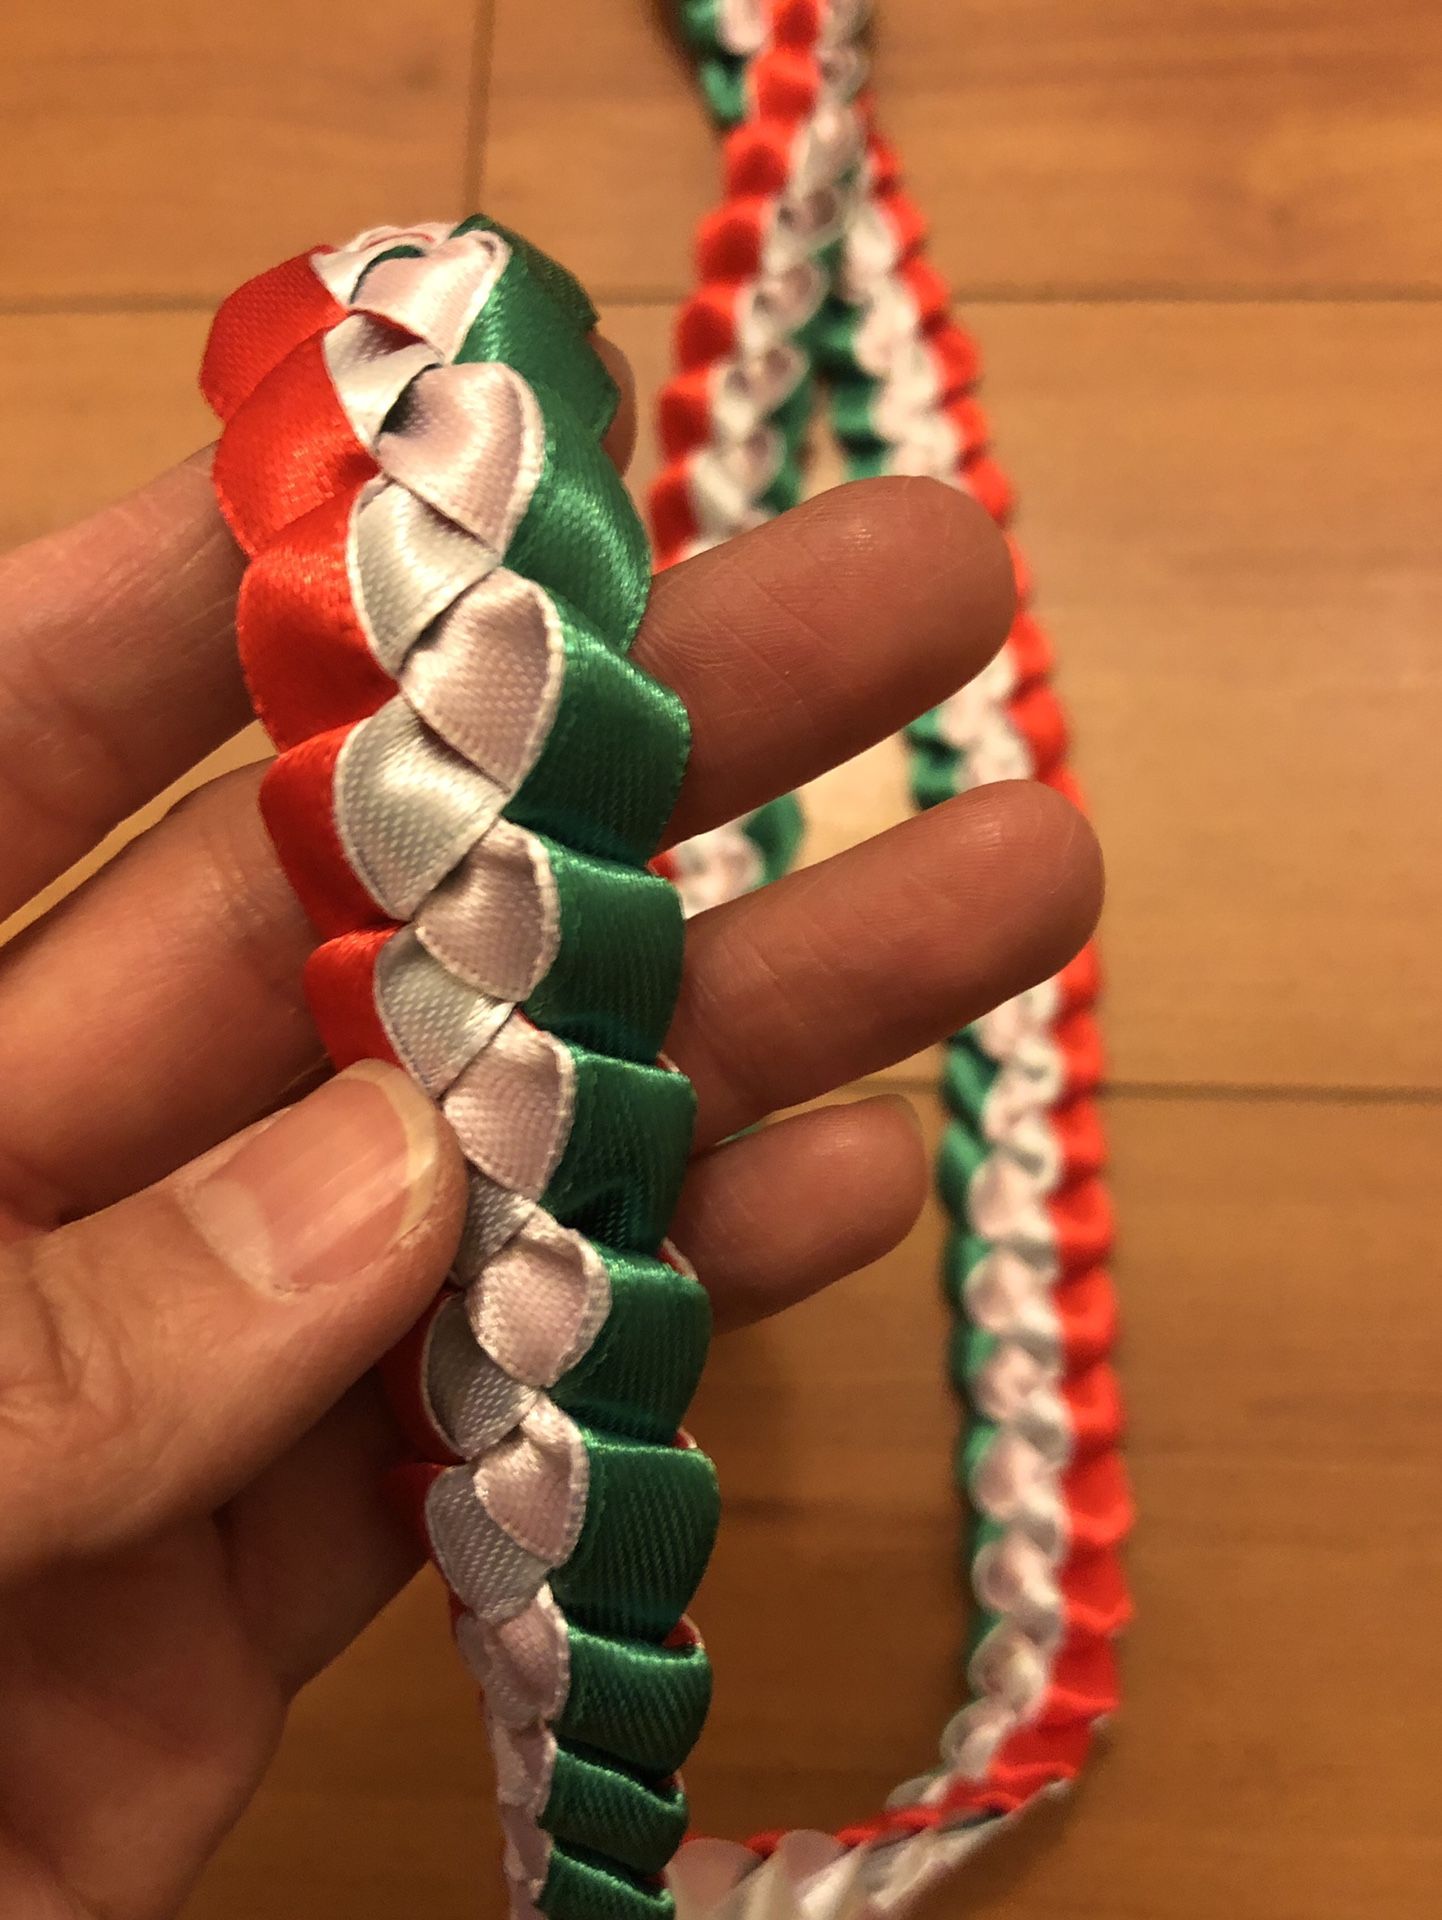 Customized 3 Color Graduation Lei (Choose your 3 colors) - Pictured: Red, White, & Green - Perfect for Mexican Pride and Heritage Representation